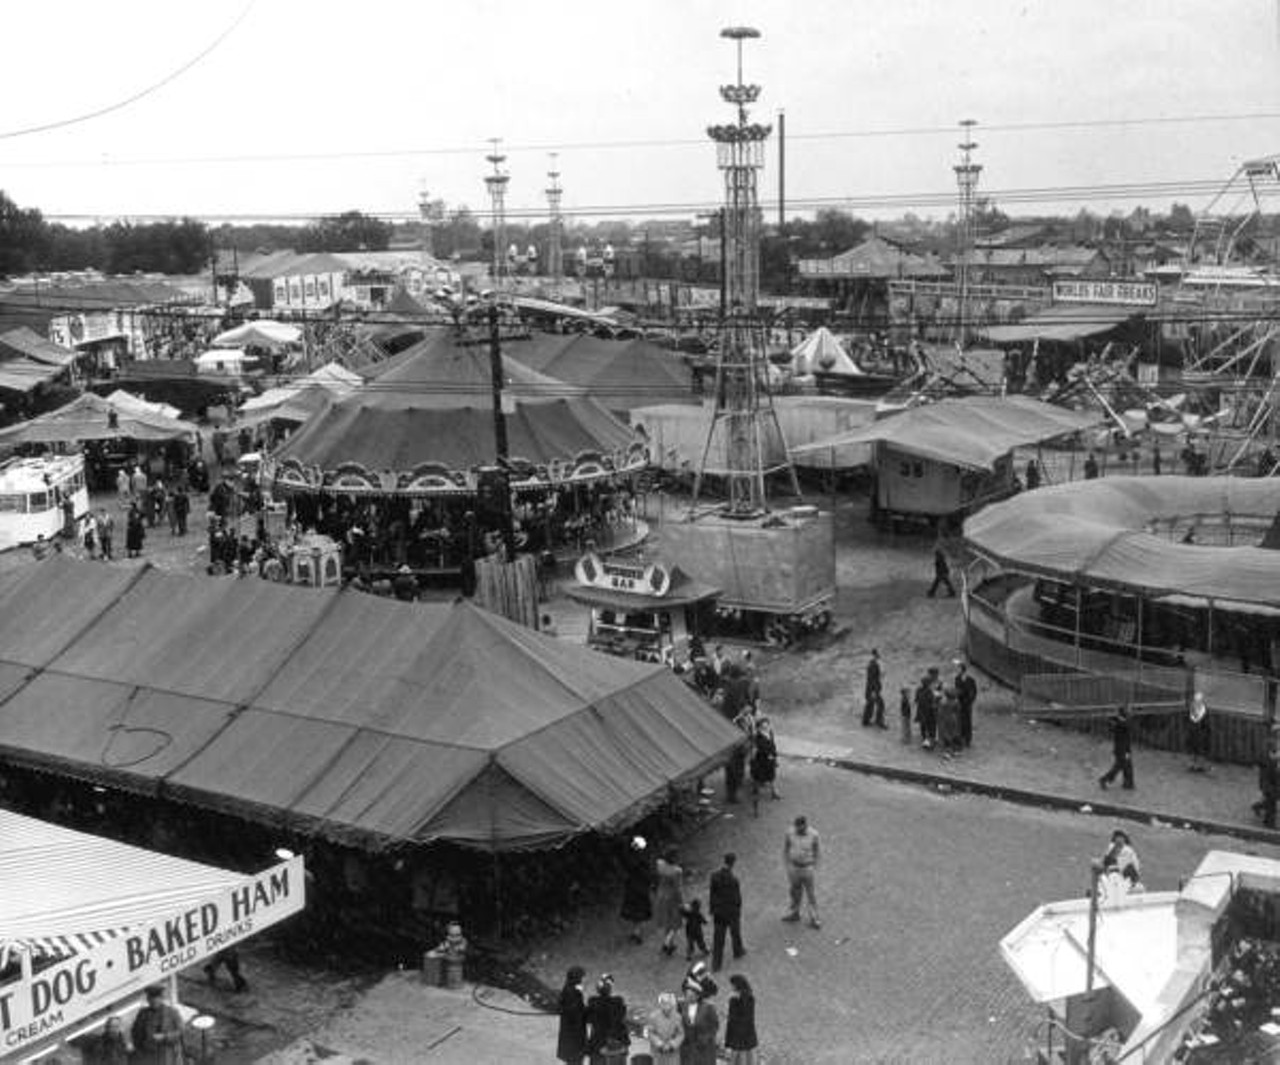 View of amusement rides at the Florida State Fair, 1947